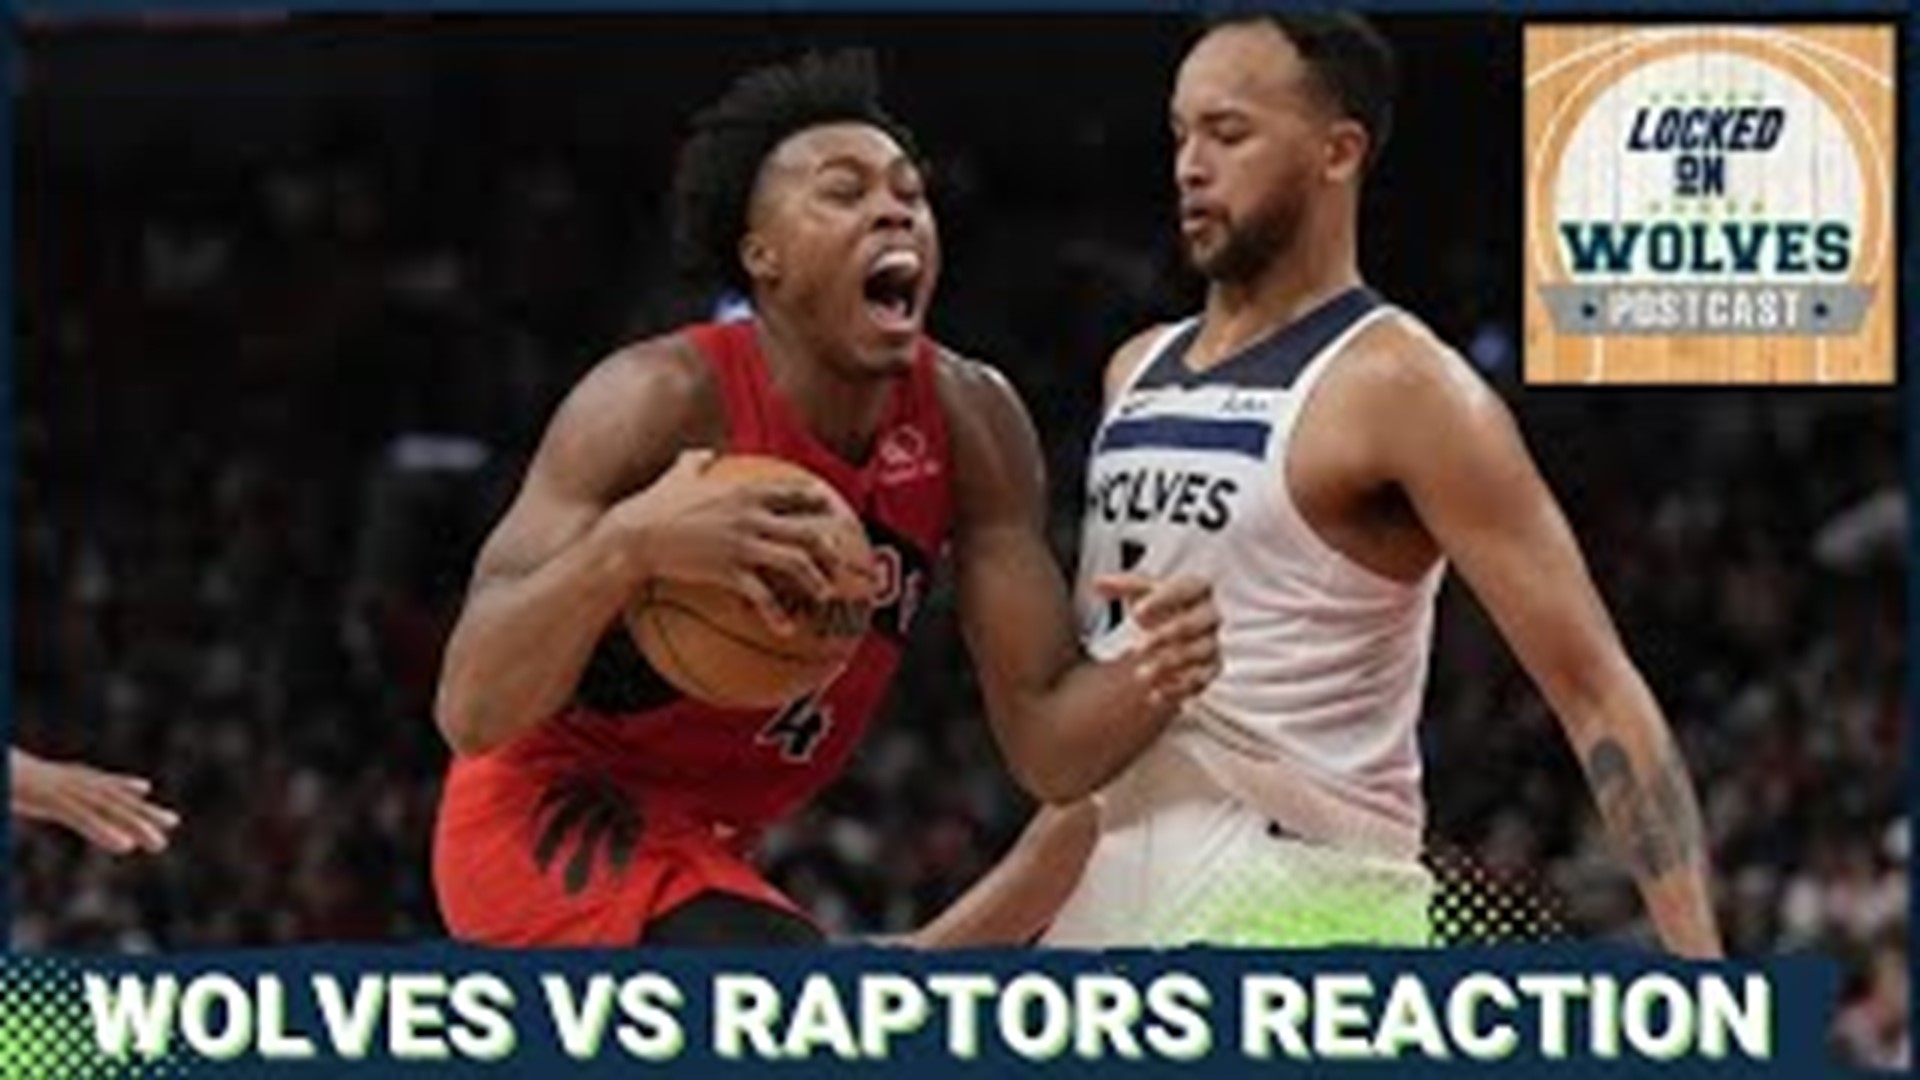 The Minnesota Timberwolves look to stay atop the western conference with a win over the Toronto Raptors. Join Luke Inman and Tyler Metcalf for the instant breakdown!